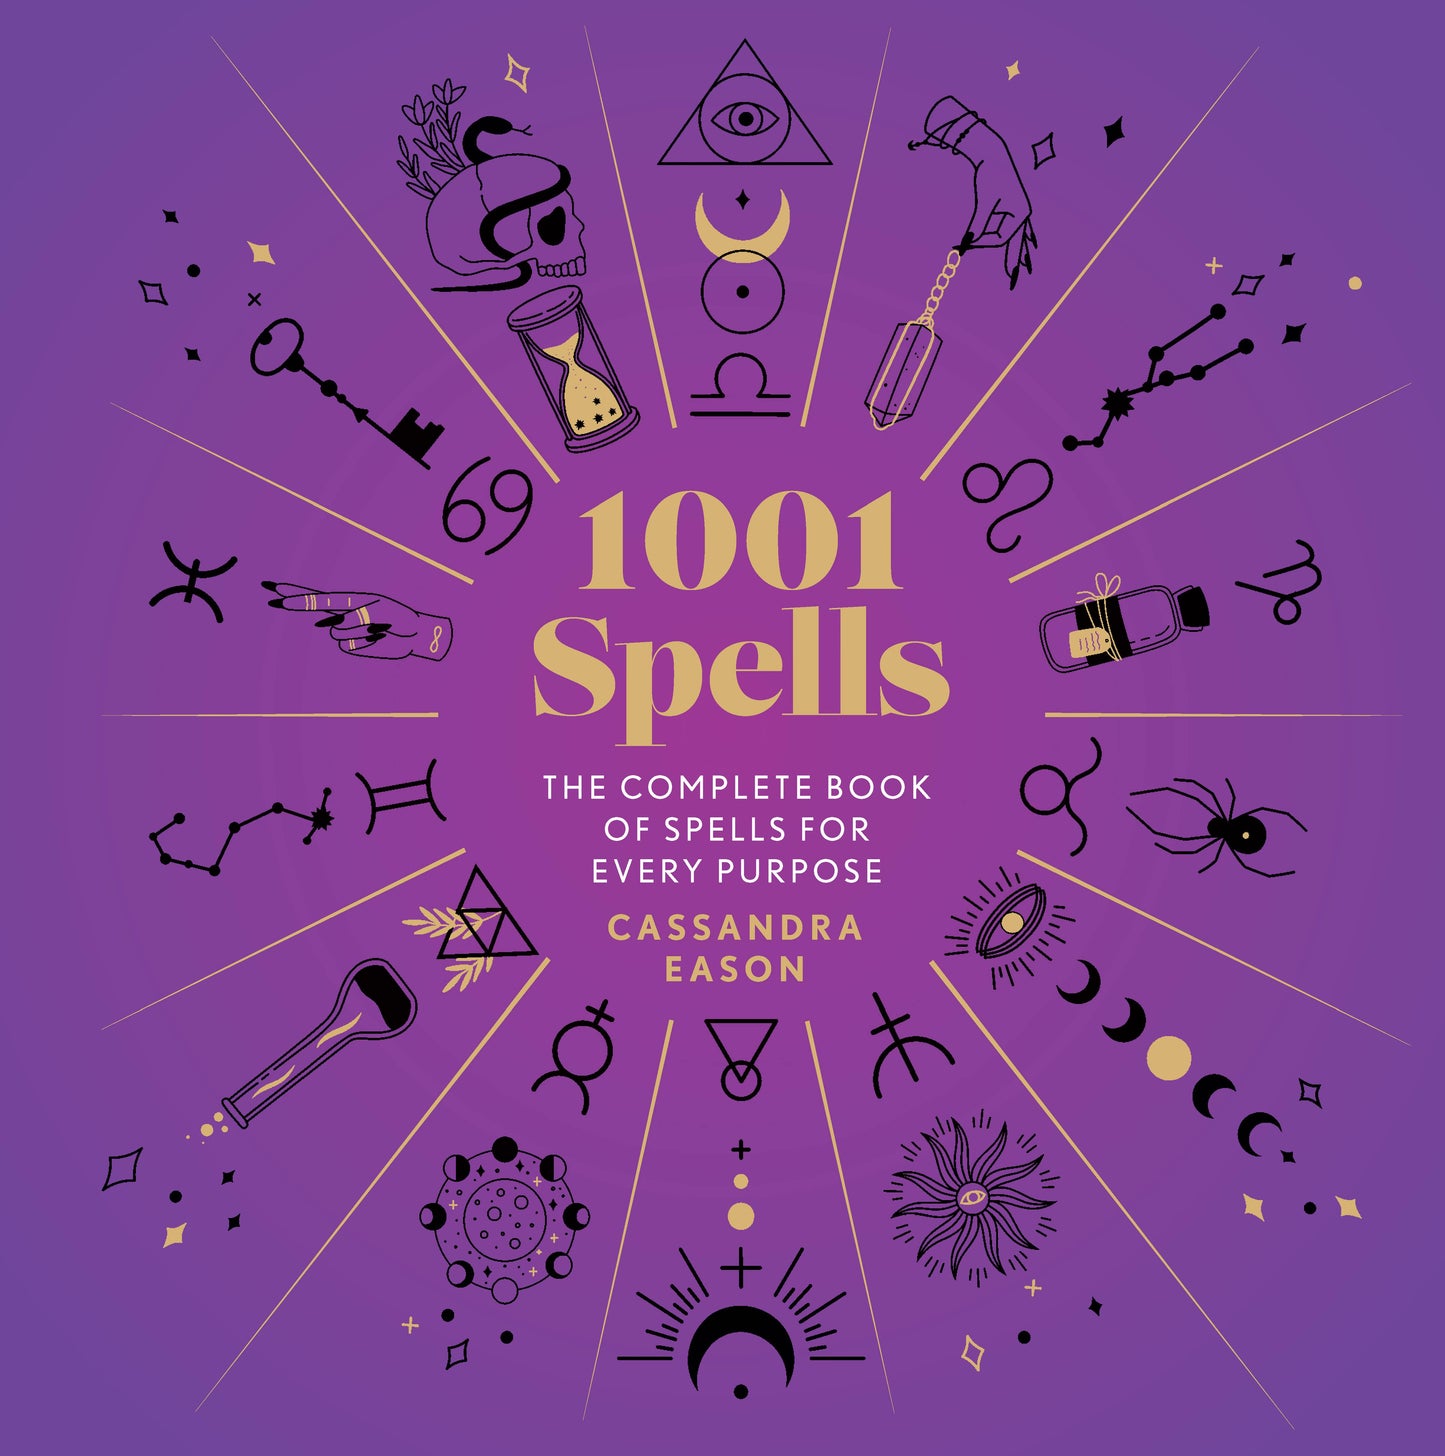 1001 Spells by Cassandra Eason (Refreshed)